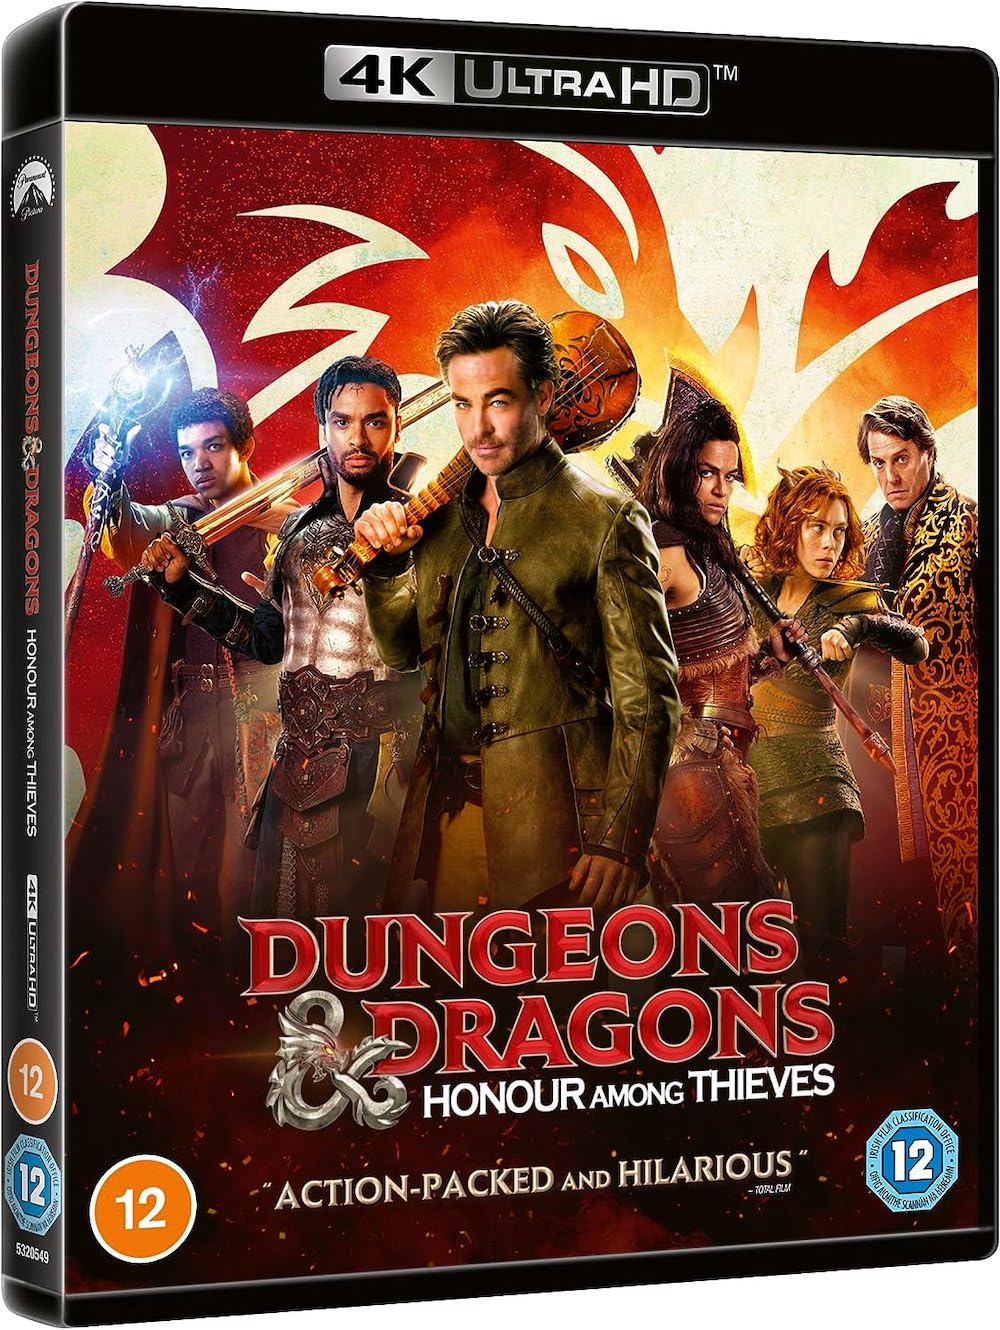 Dungeons & Dragons: Honor Among Thieves (Film) - TV Tropes